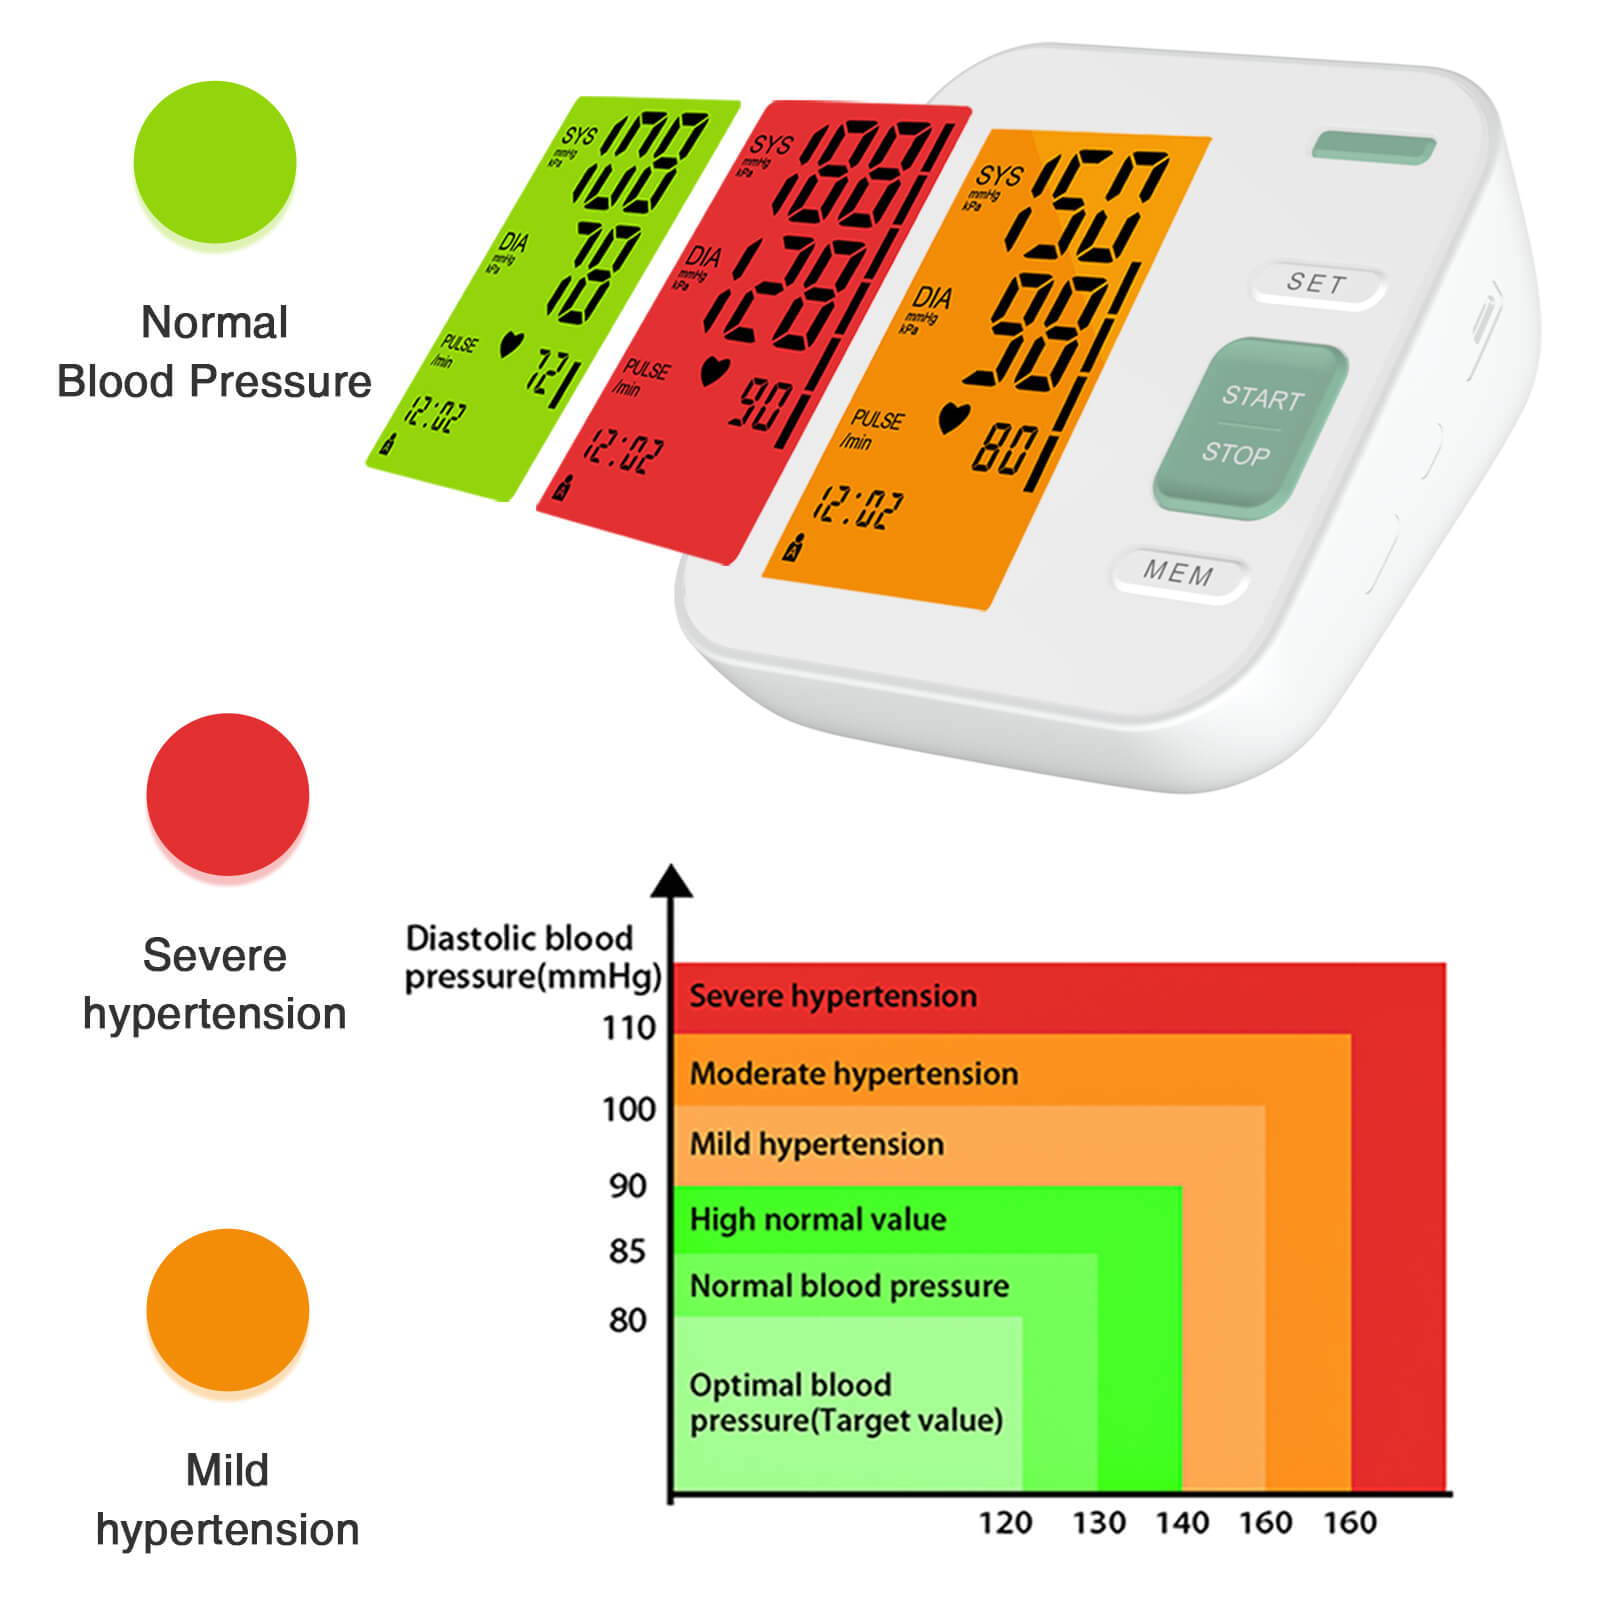 A diagram shows different levels of hypertension with red, green, and orange 